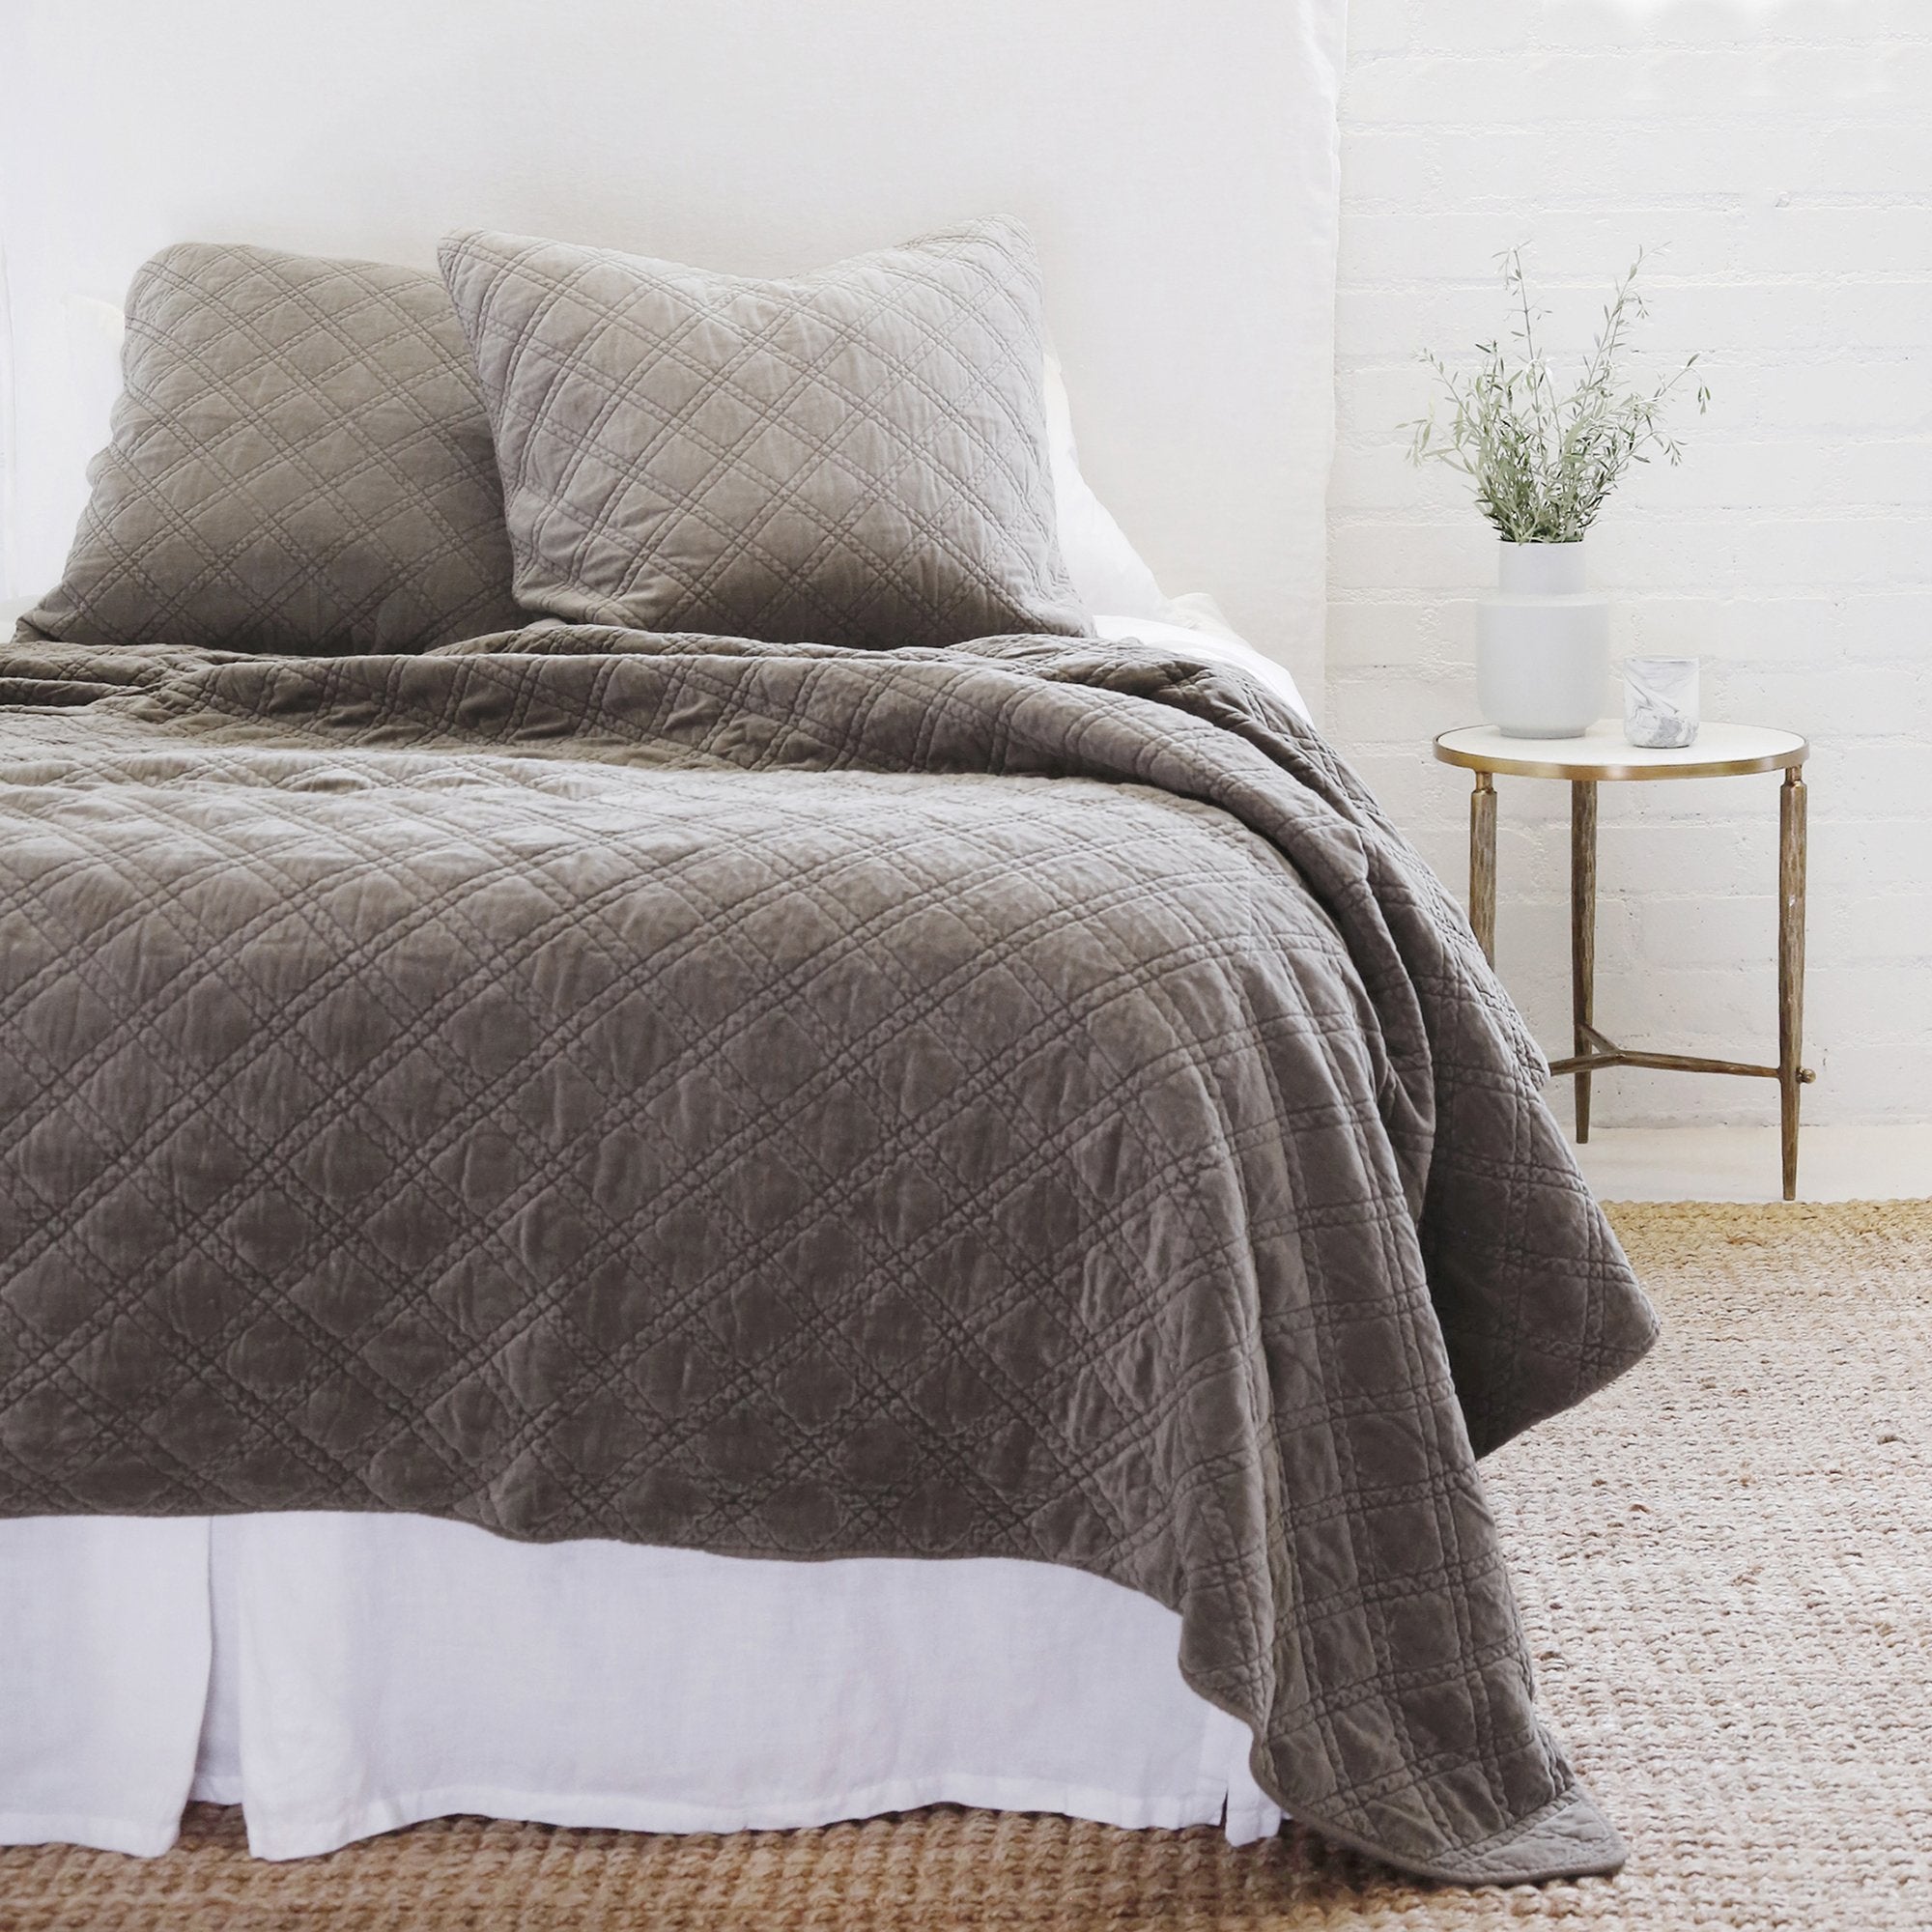 The Brussels Coverlet Bedding Pewter by Pom Pom at Home is a grand and sophisticated line that has a diamond quilted pattern on the front, made of 100% stone washed cotton velvet. Available in several soft, stone washed colors.  100% cotton velvet Machine wash cold; tumble dry low; warm iron as needed Do not bleach